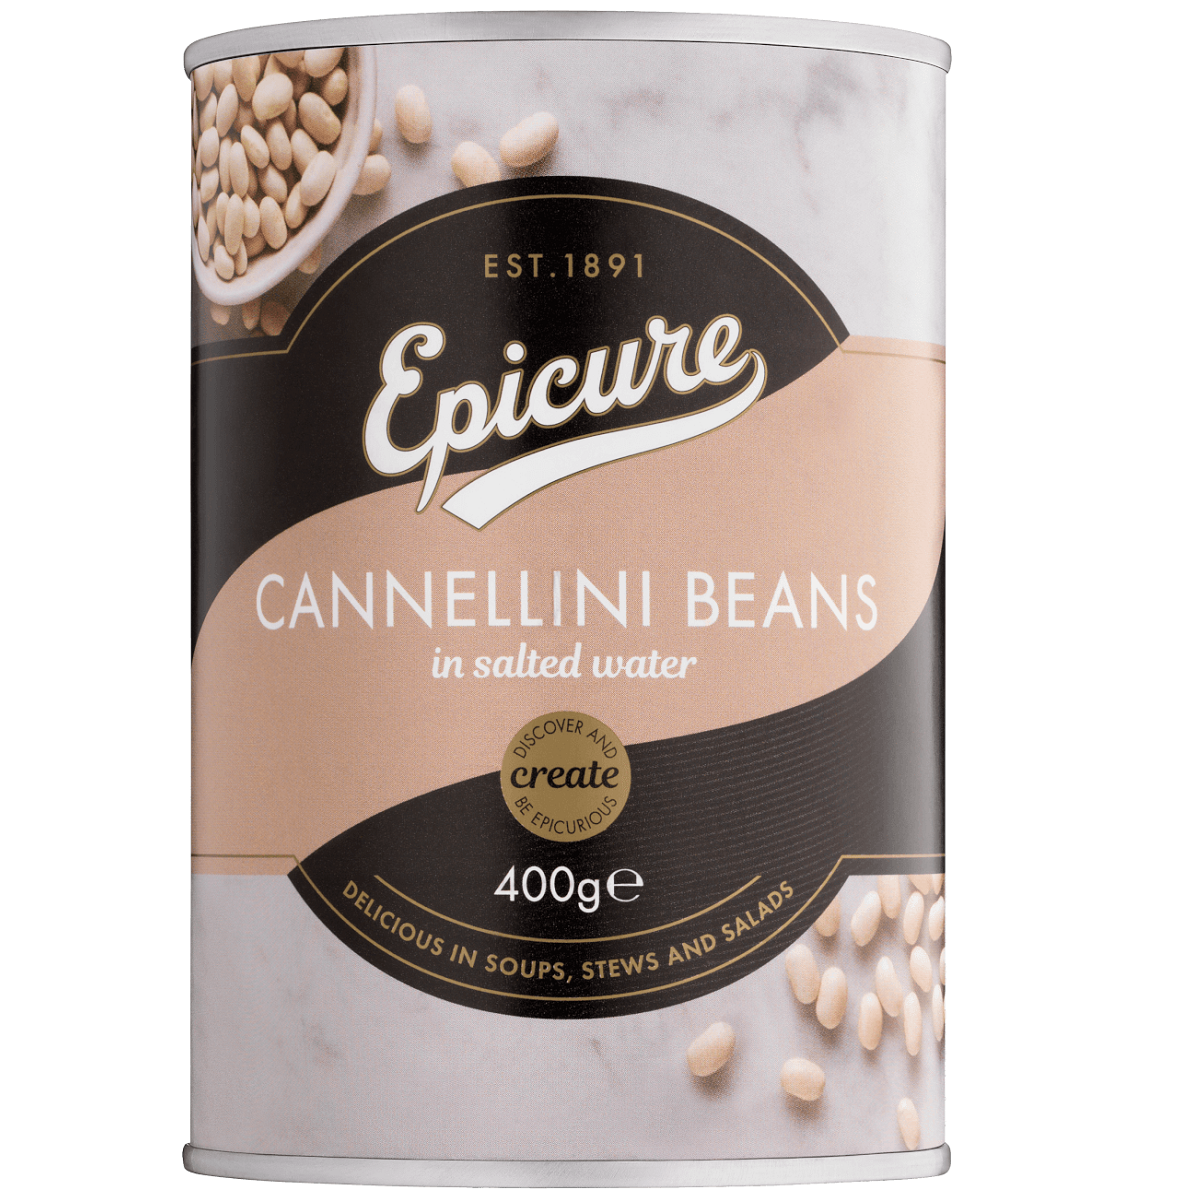 Epicure Cannellini Beans in salted water 400g